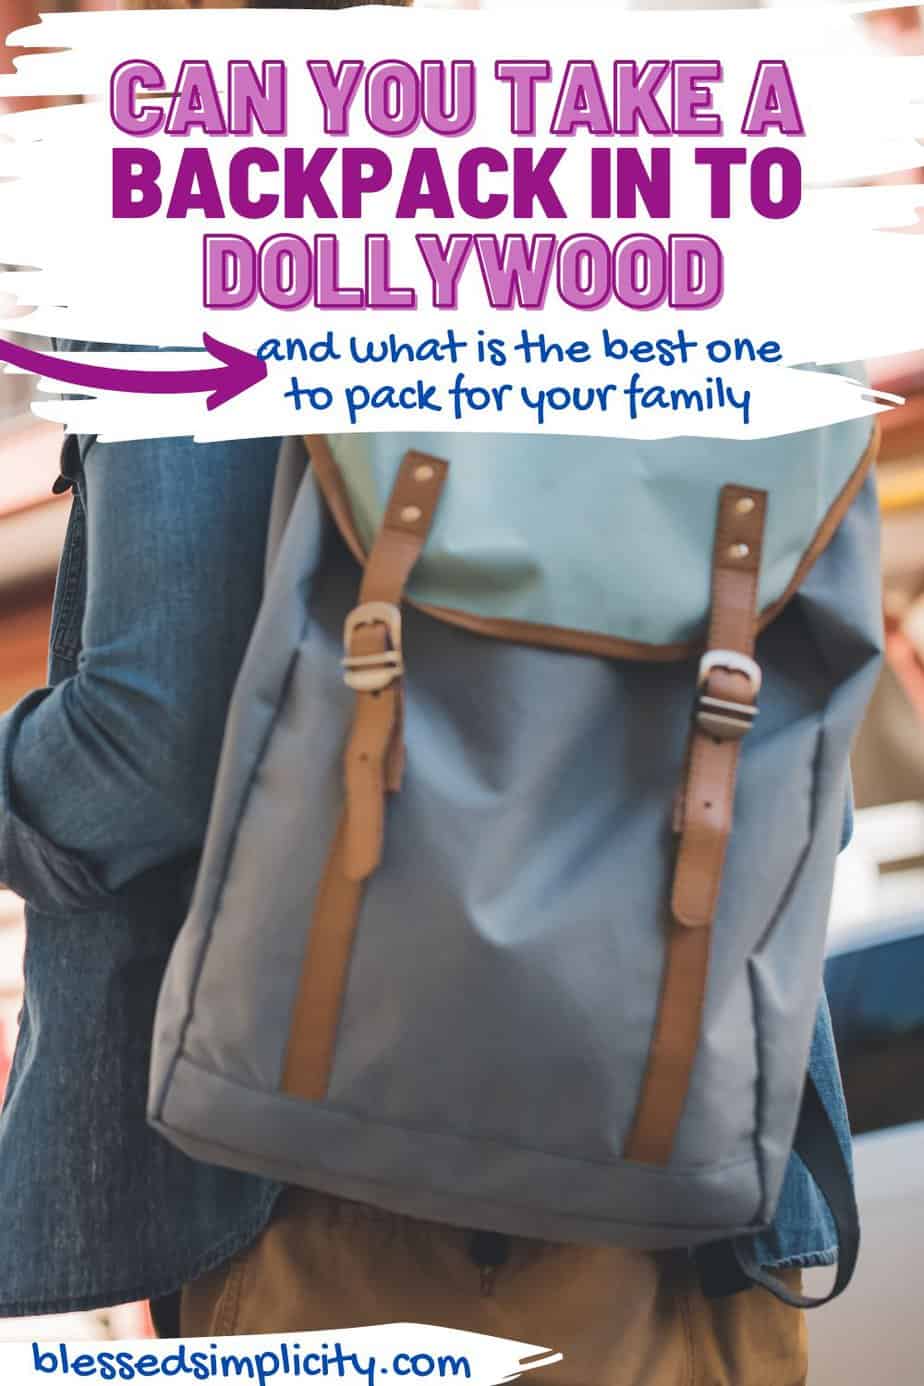 Can you bring a backpack into Dollywood